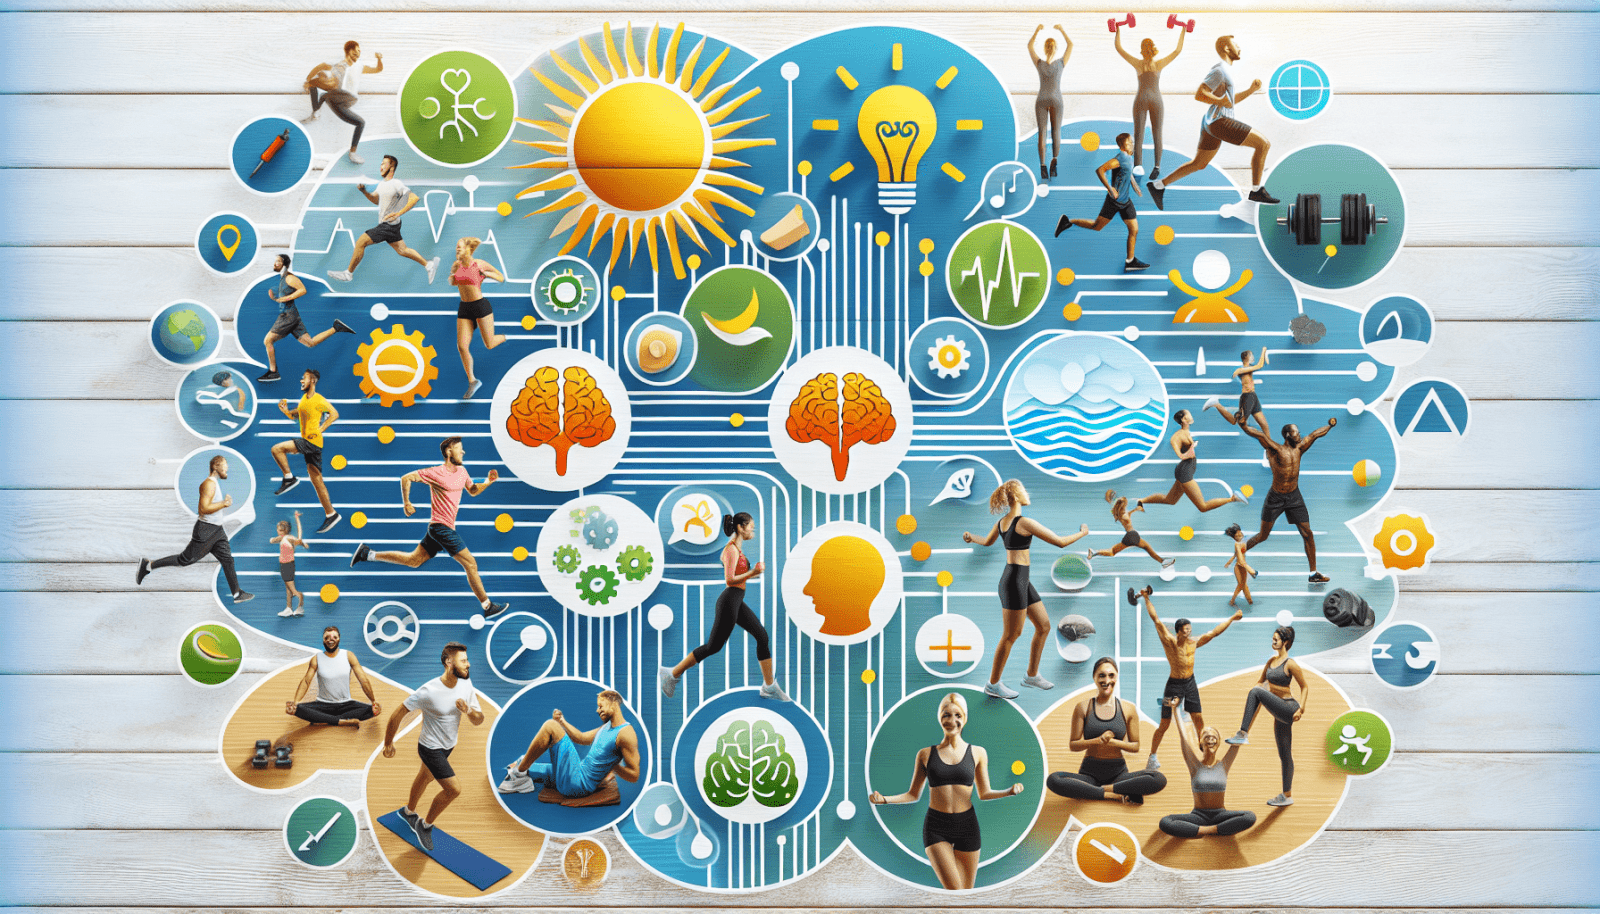 Illustration of diverse people engaging in various physical activities such as running, yoga, and weightlifting, integrated with icons representing health and wellness concepts like nutrition, hydration, mental health, and fitness, all overlaying a stylized circuit board pattern on a wooden background.